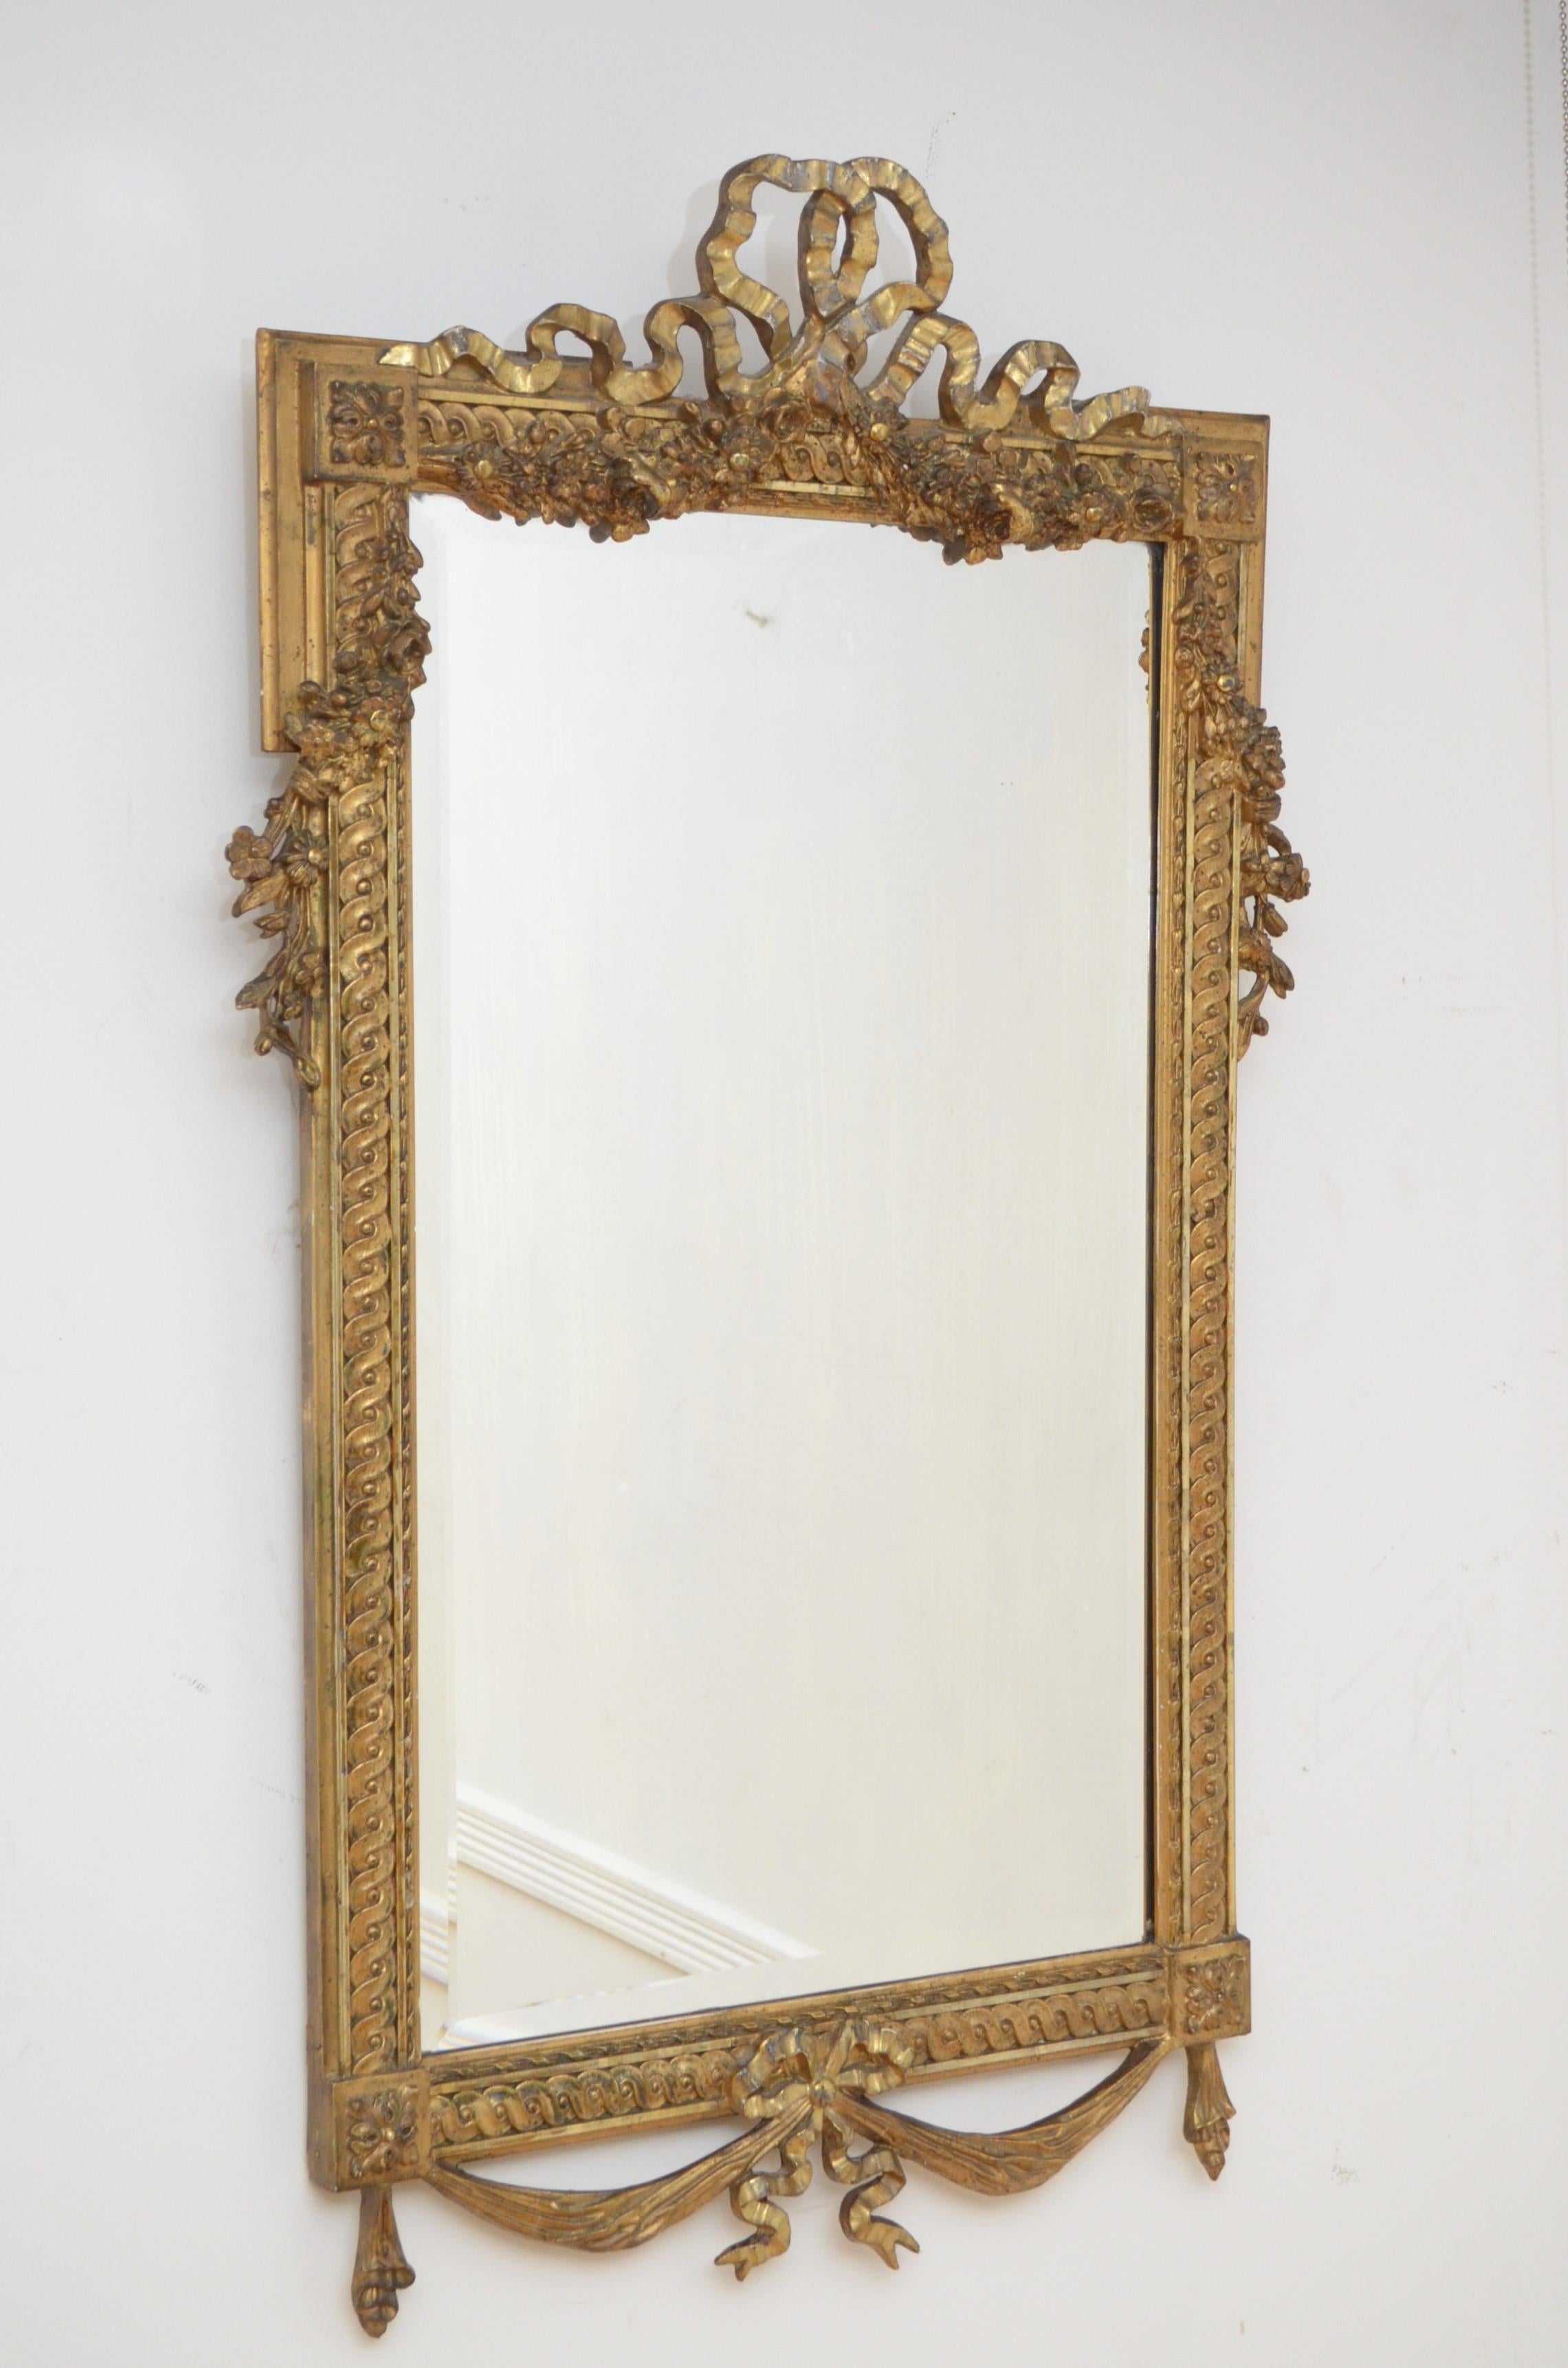 k00160 Elaborate early 20th century giltwood wall mirror, having original bevelled edge glass with some imperceptions in beautifully carved frame with swags to the base and bow crest to the top flanked by extensive floral decoration. This antique